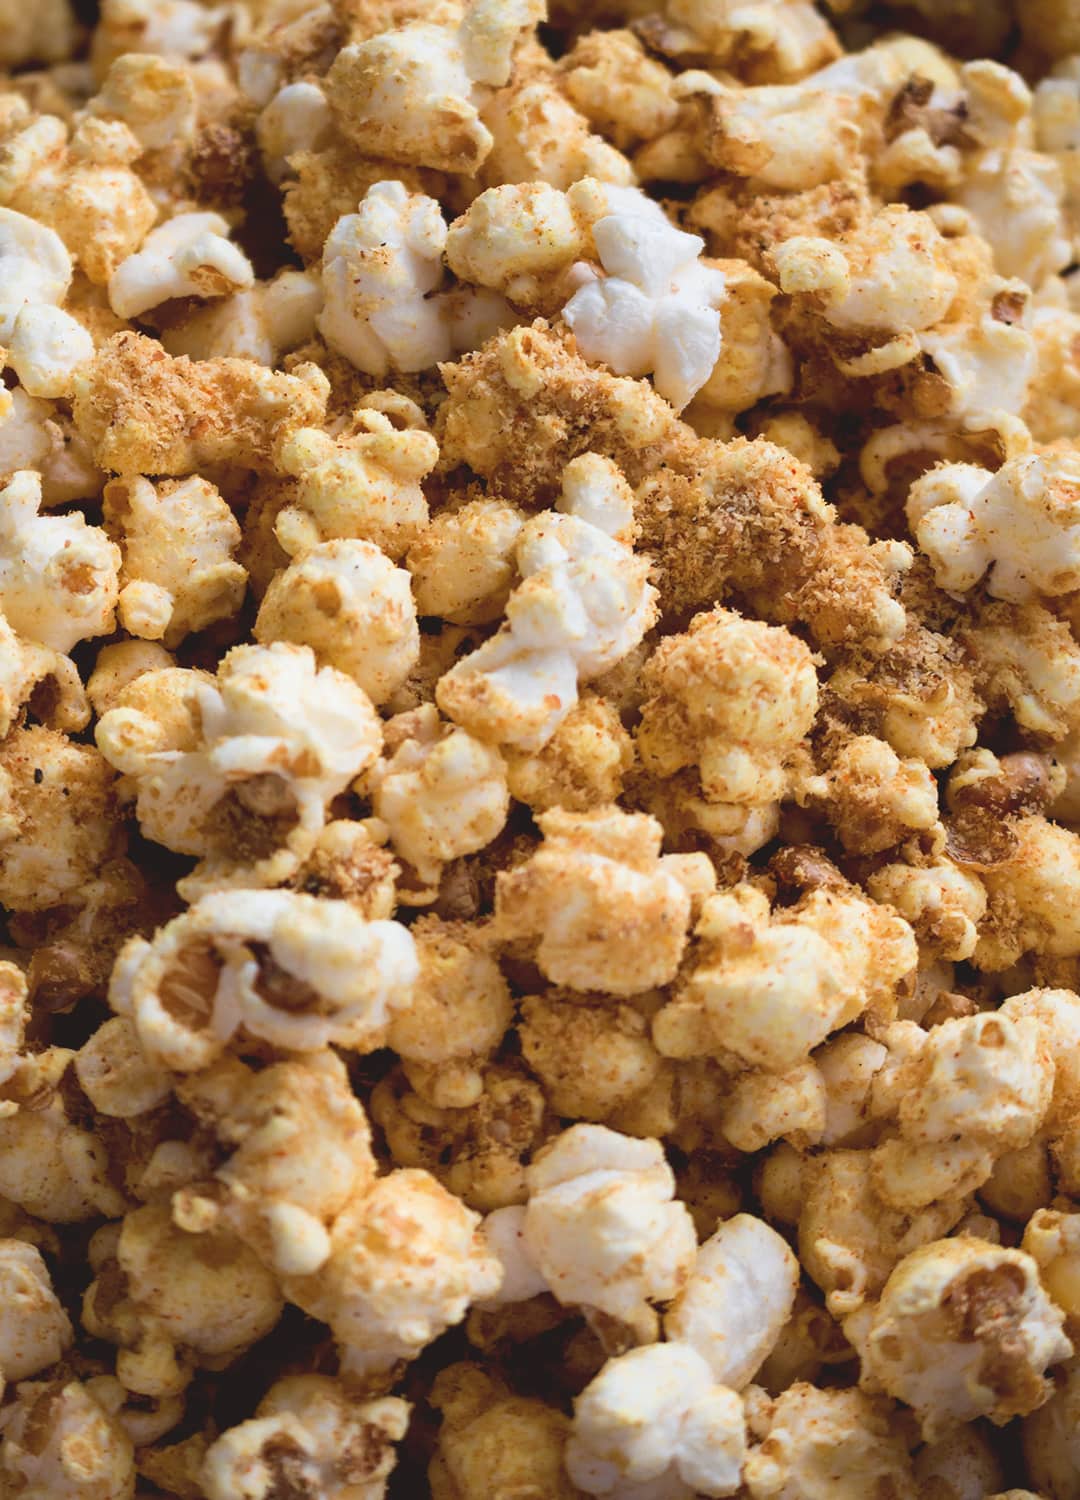 Cheesy Vegan Popcorn - a delicious healthy twist on the classic. Popped the old-fashioned way on the stove with coconut oil and then spiced to perfecting. Ridiculously easy to make! | thehealthfulideas.com